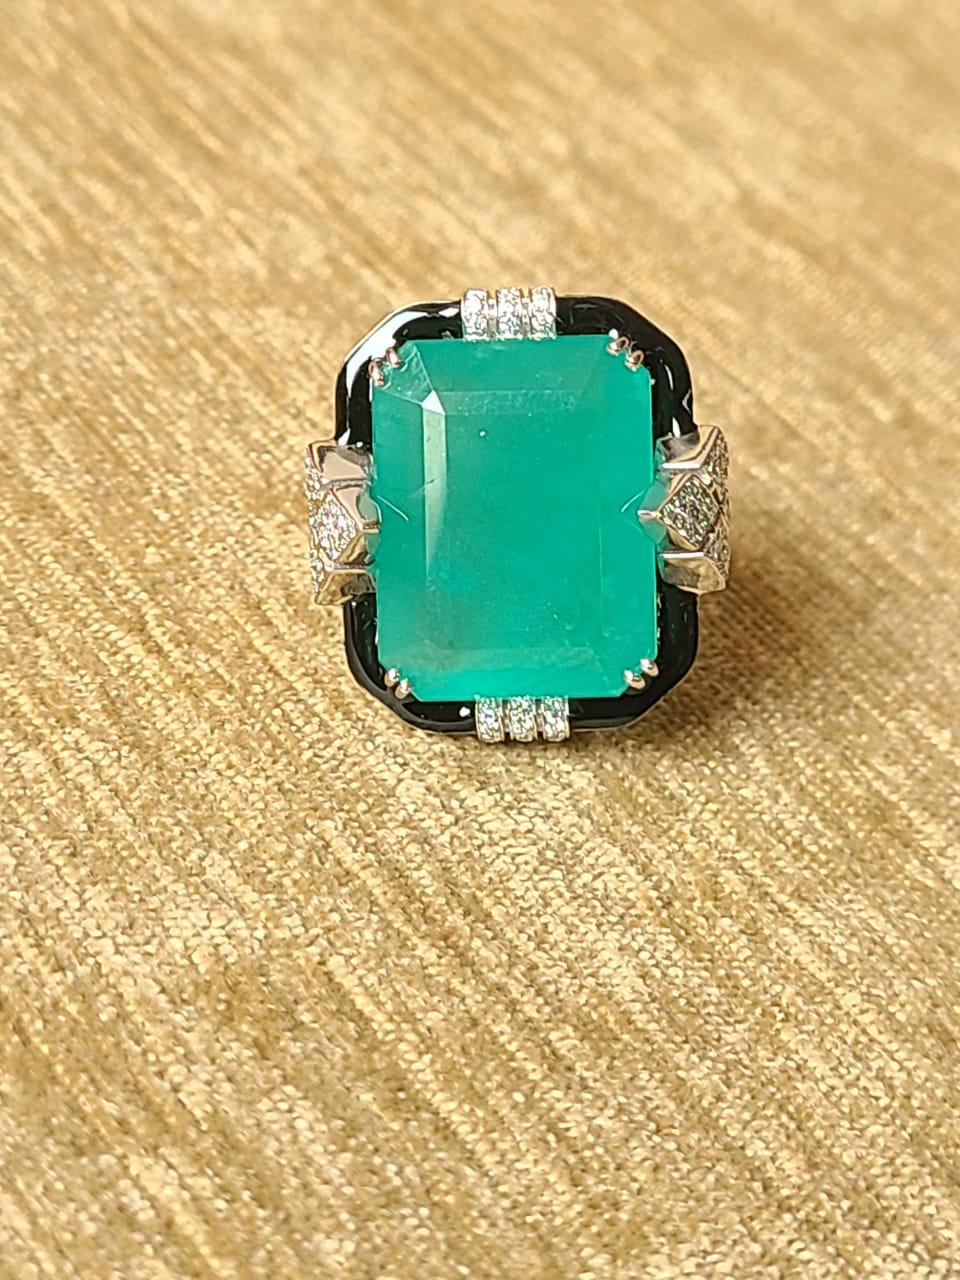 A very gorgeous Emerald & Black Enamel, ART- Deco Style Cocktail Ring set in 18K Gold & Diamonds. The weight of the Emerald is 19.35 carats. The Emerald is completely natural without any treatment, and is of Zambian origin. The weight of the